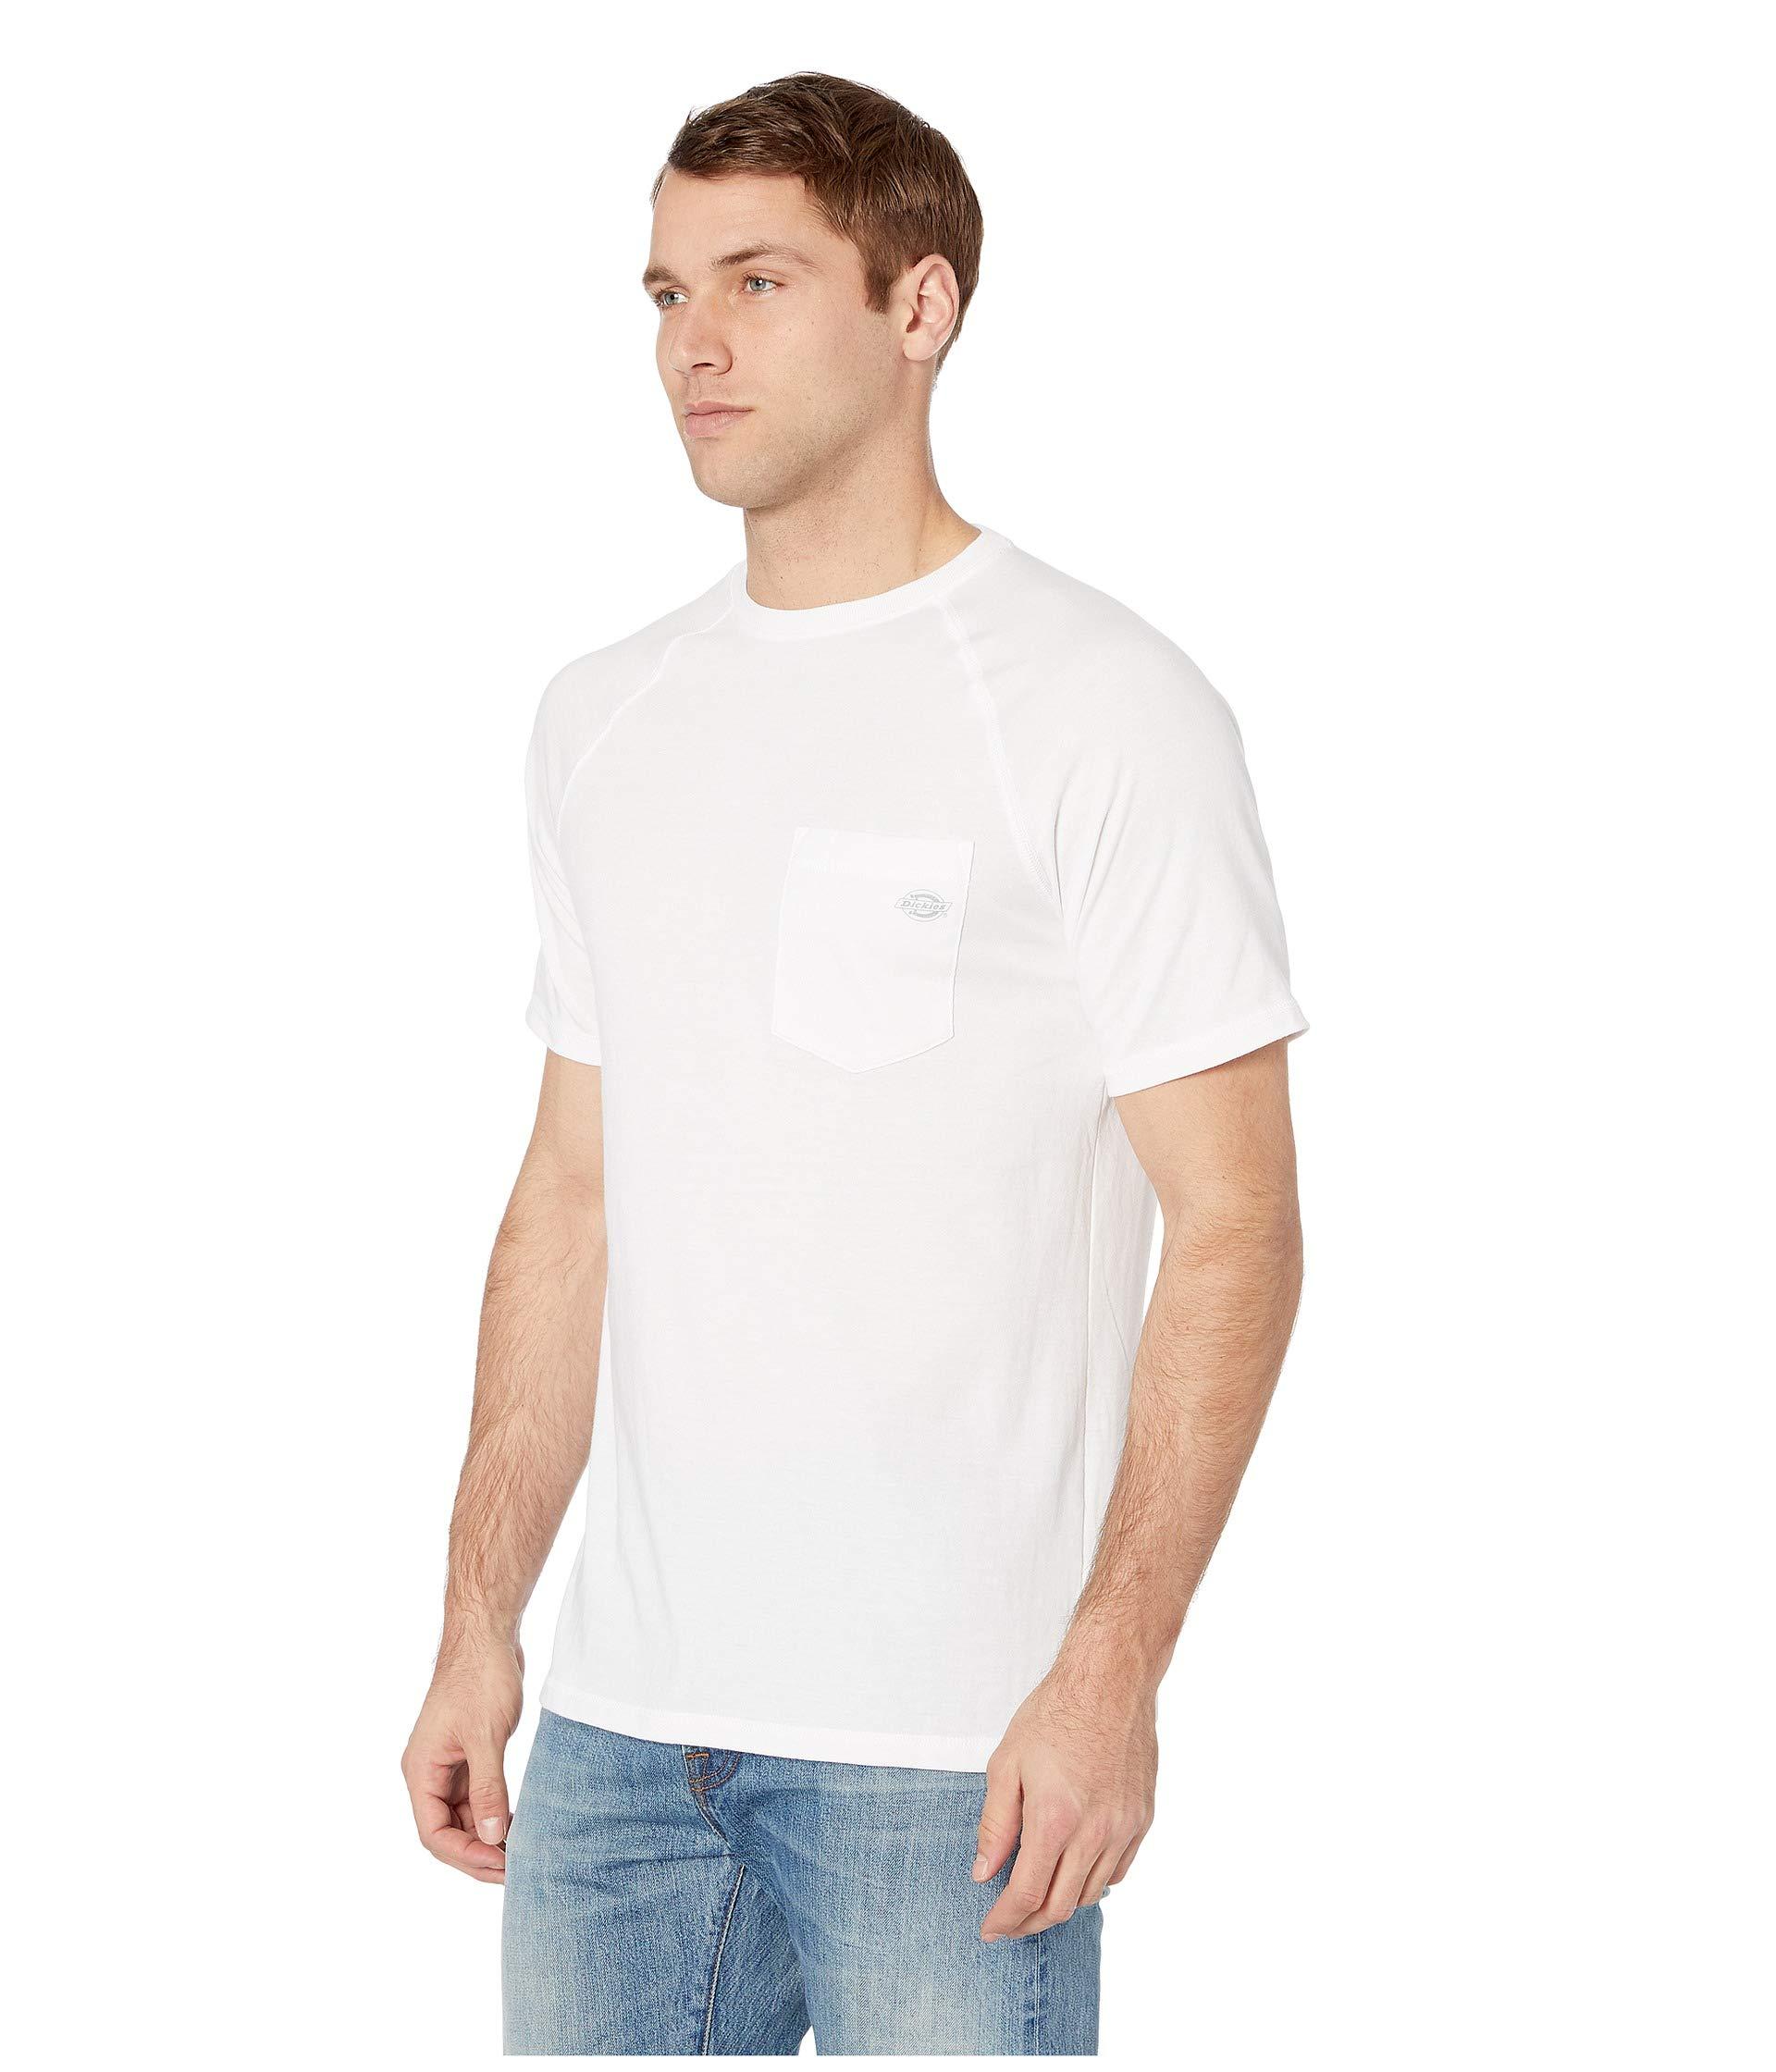 Dickies Synthetic Temp-iq Performance Cooling Tee in White for Men - Lyst